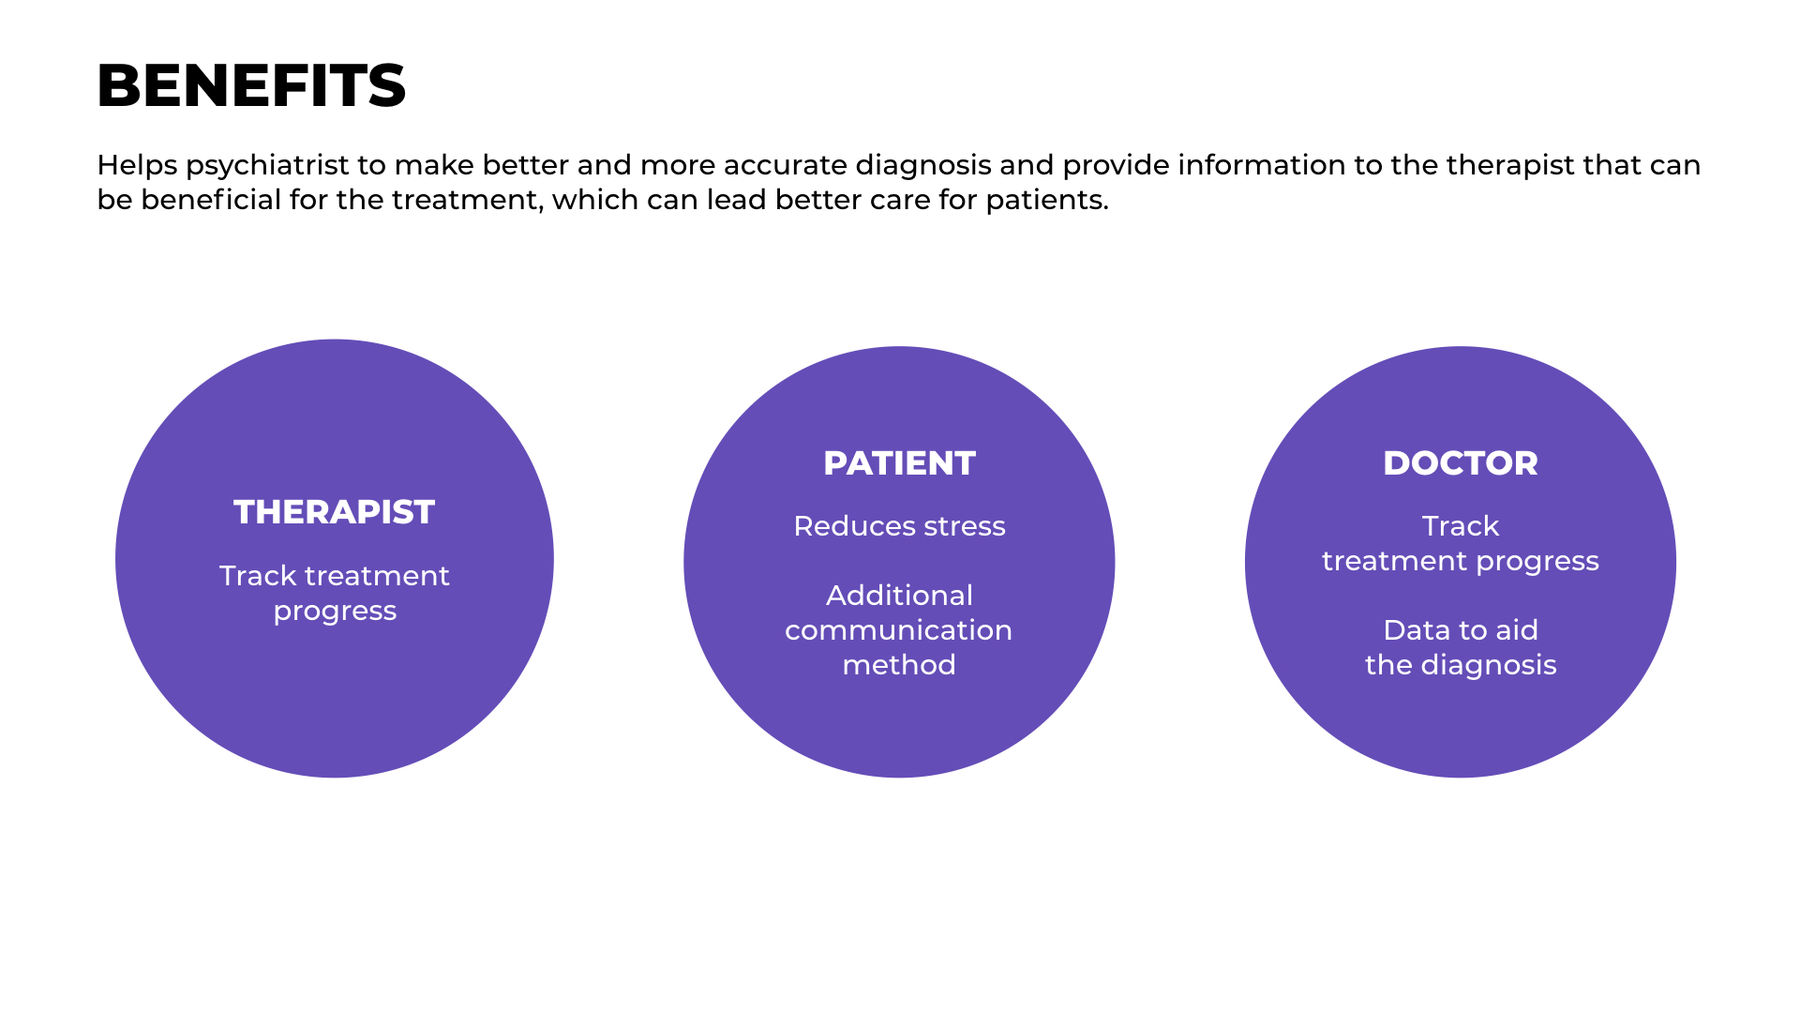 Diagram showing the benefits for the therapist, patient and the doctor